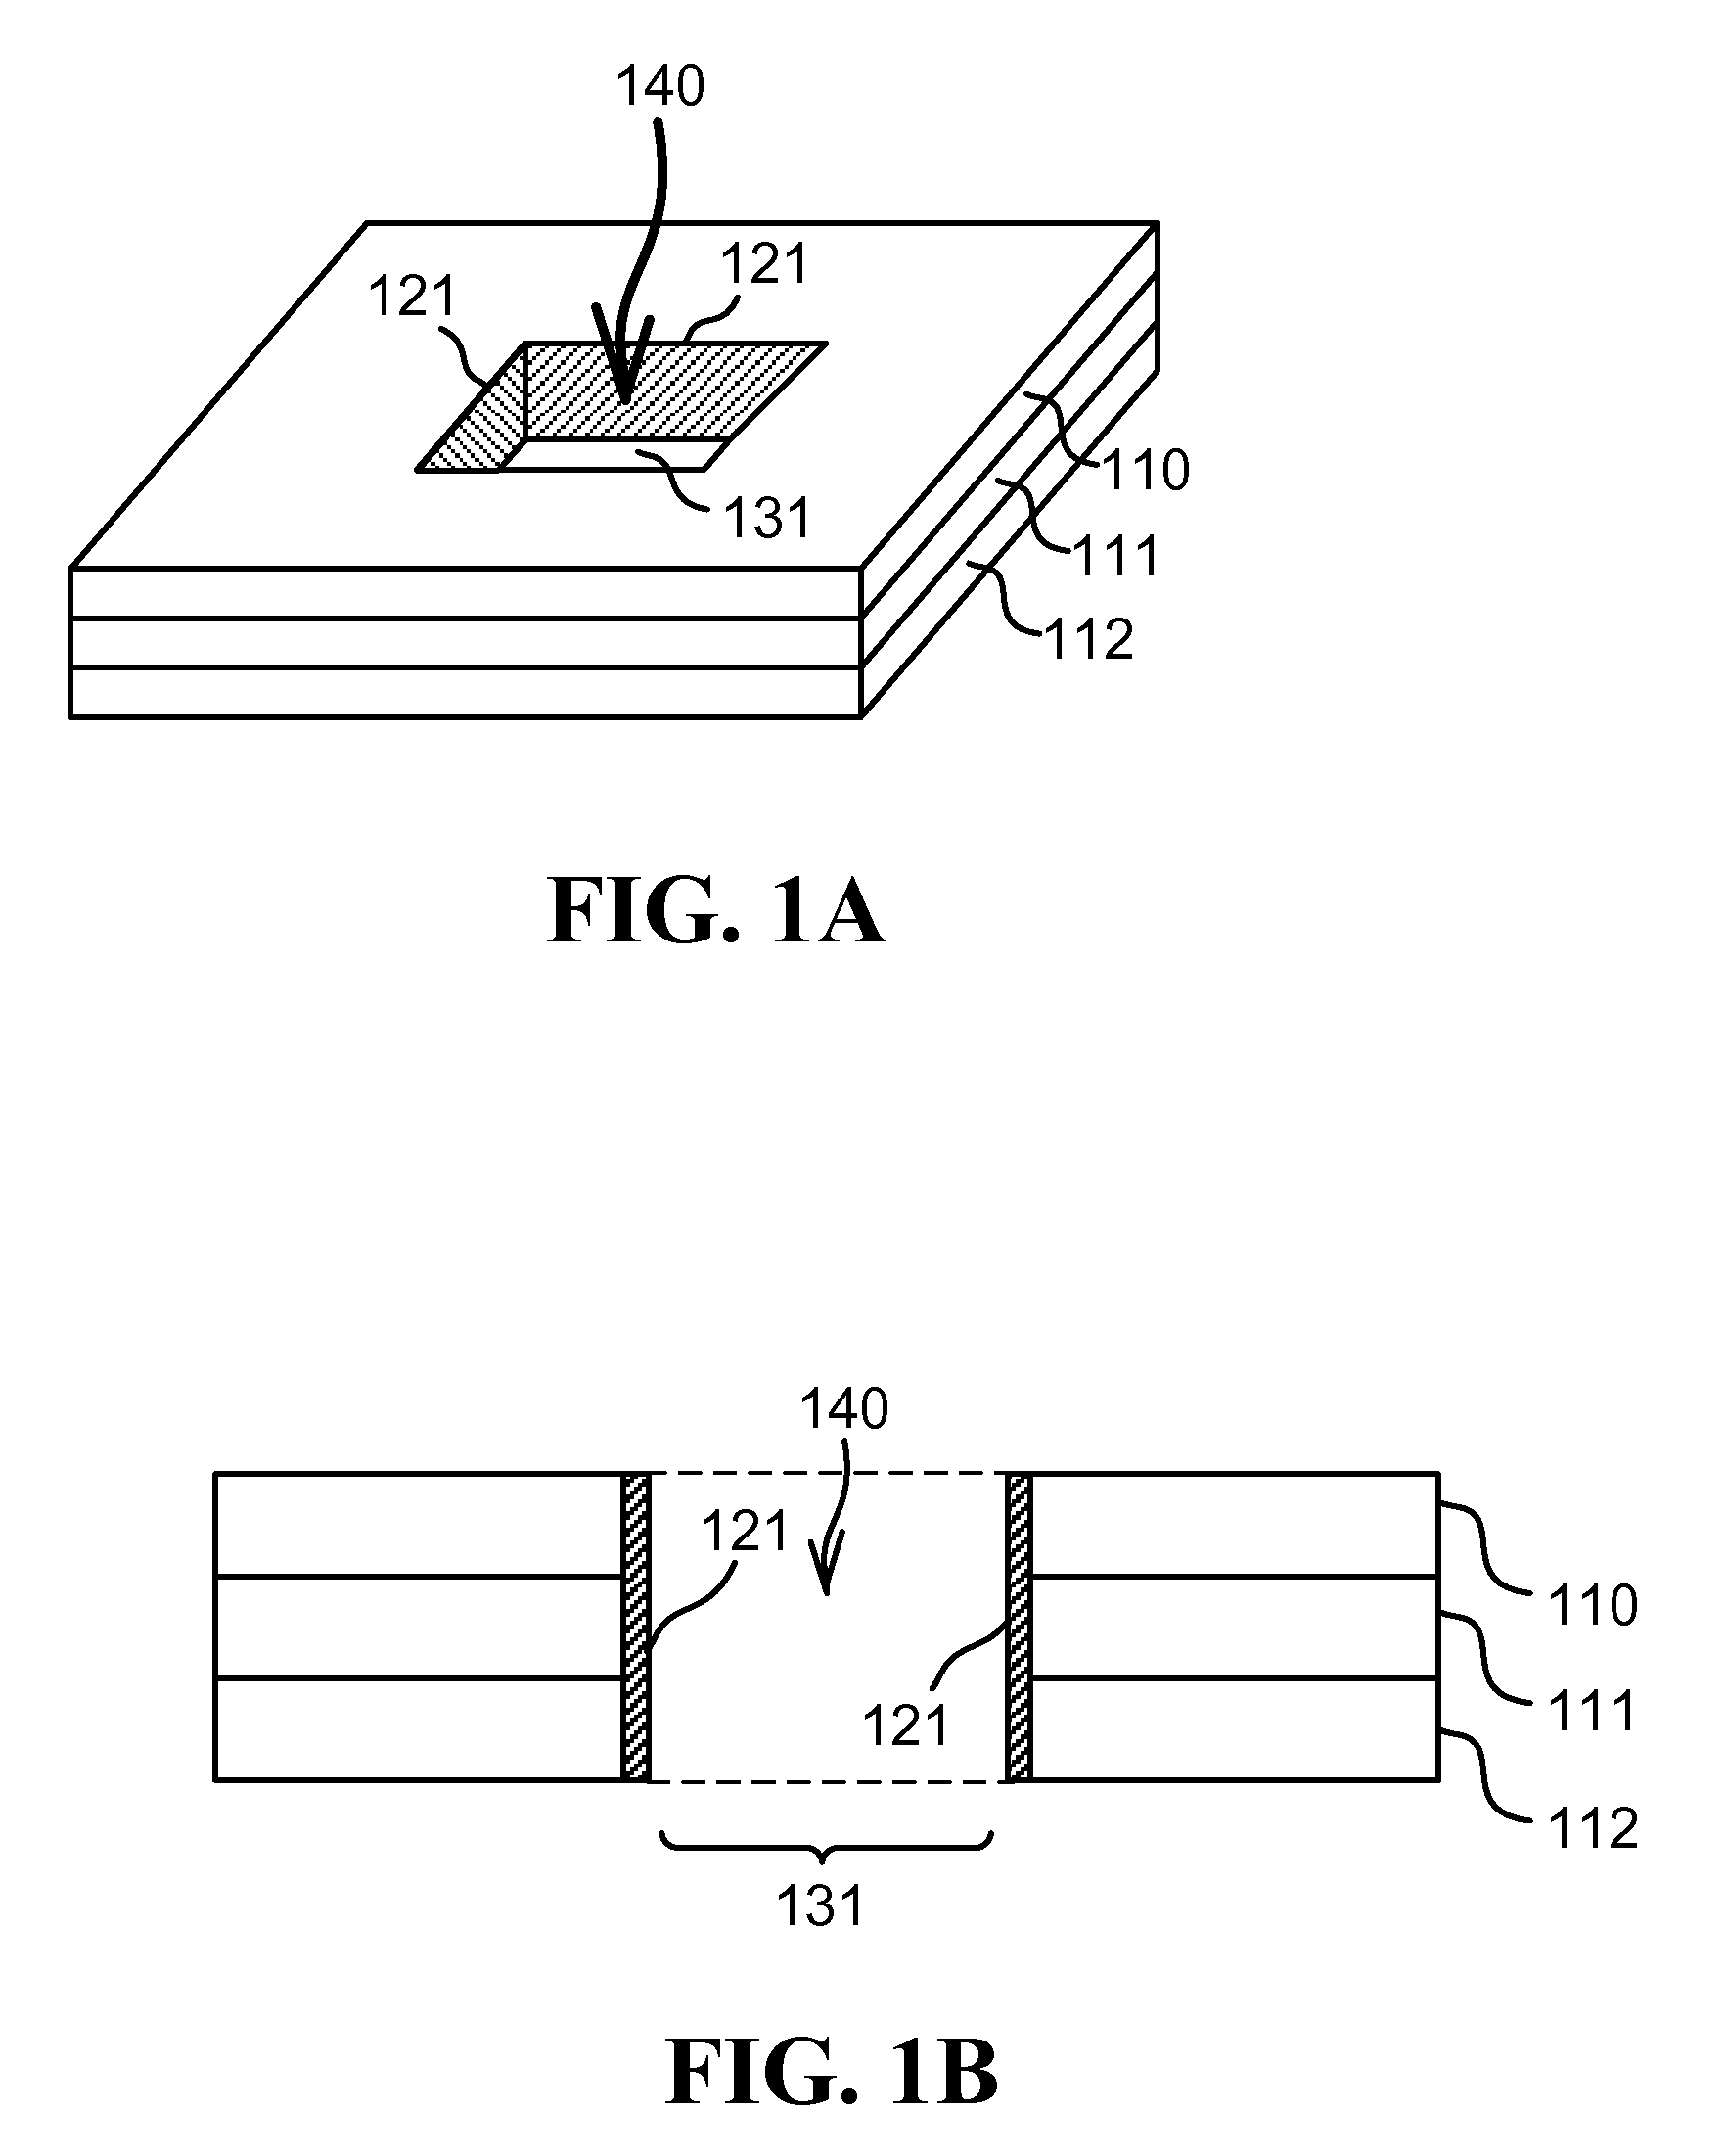 Laminate structures having a hole surrounding a probe for propagating millimeter waves